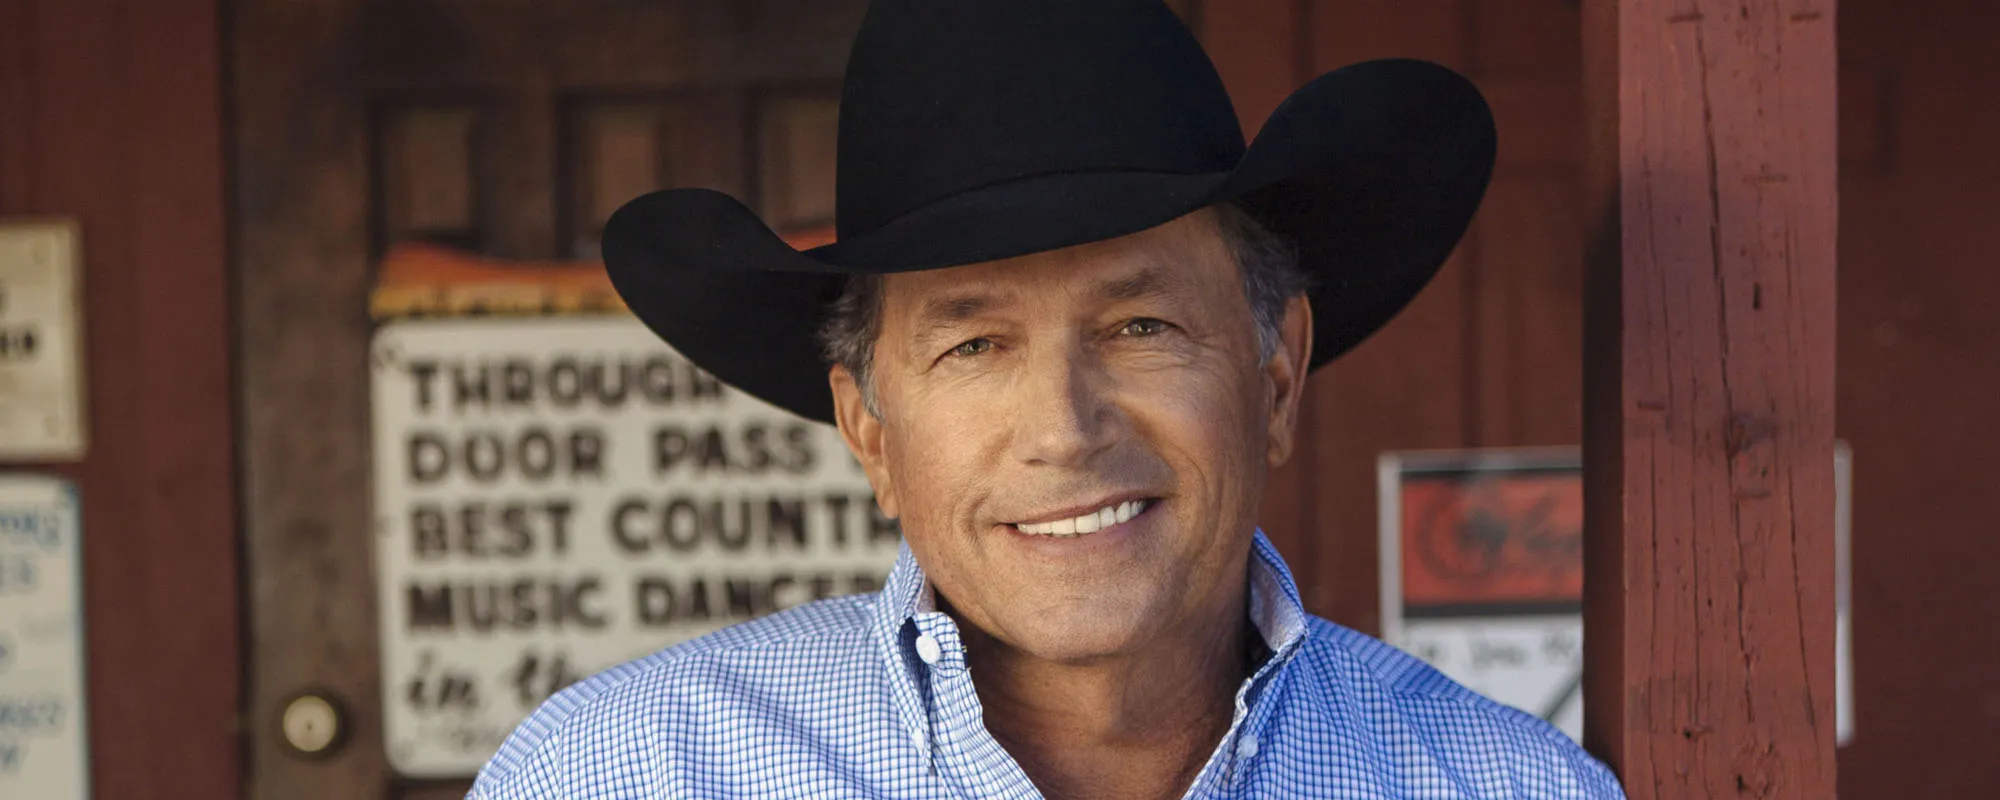 The Top 10 George Strait Songs